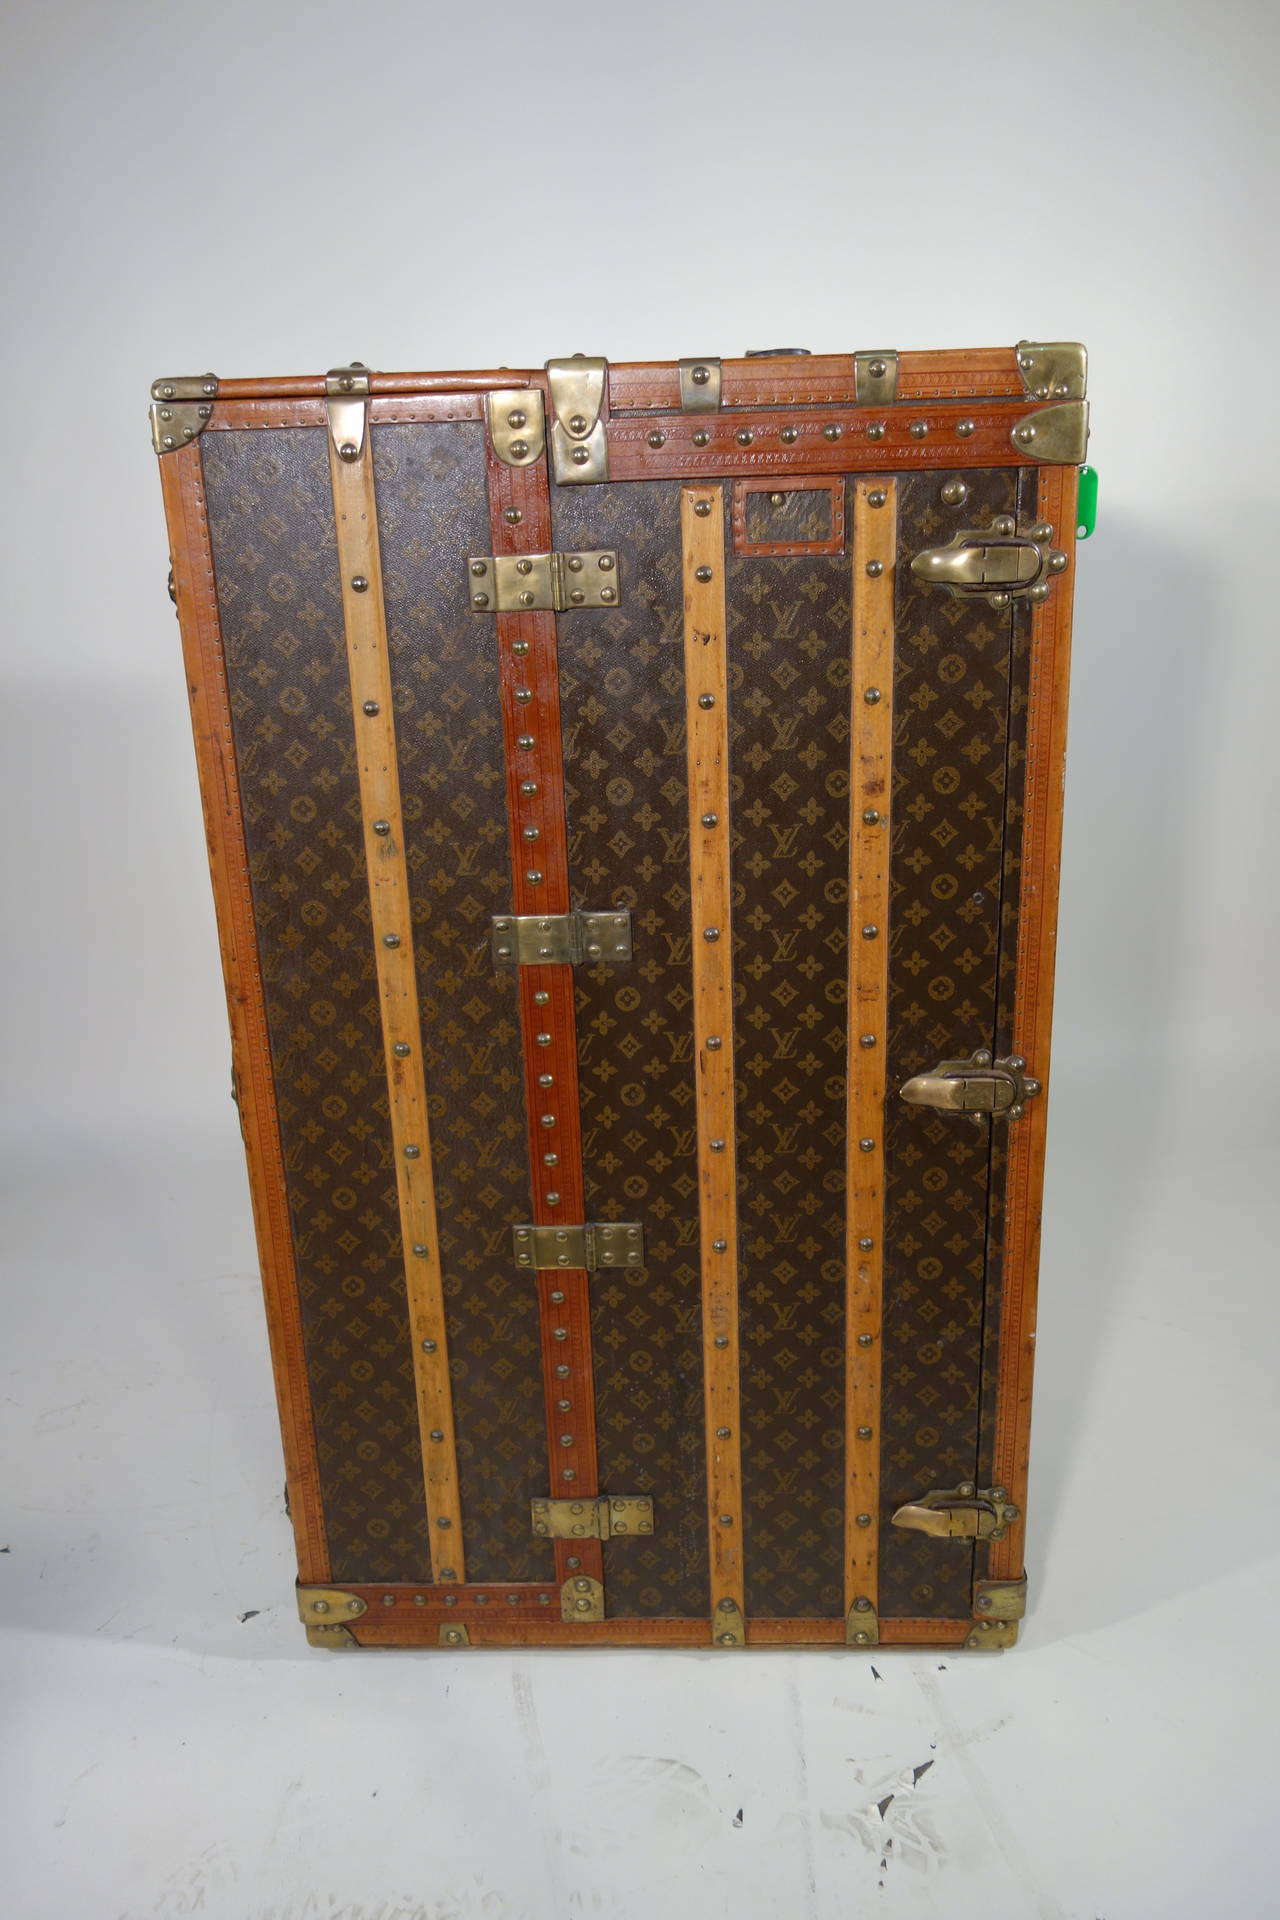 1930s Louis Vuitton Wardrobe Trunk with Turntable at 1stdibs